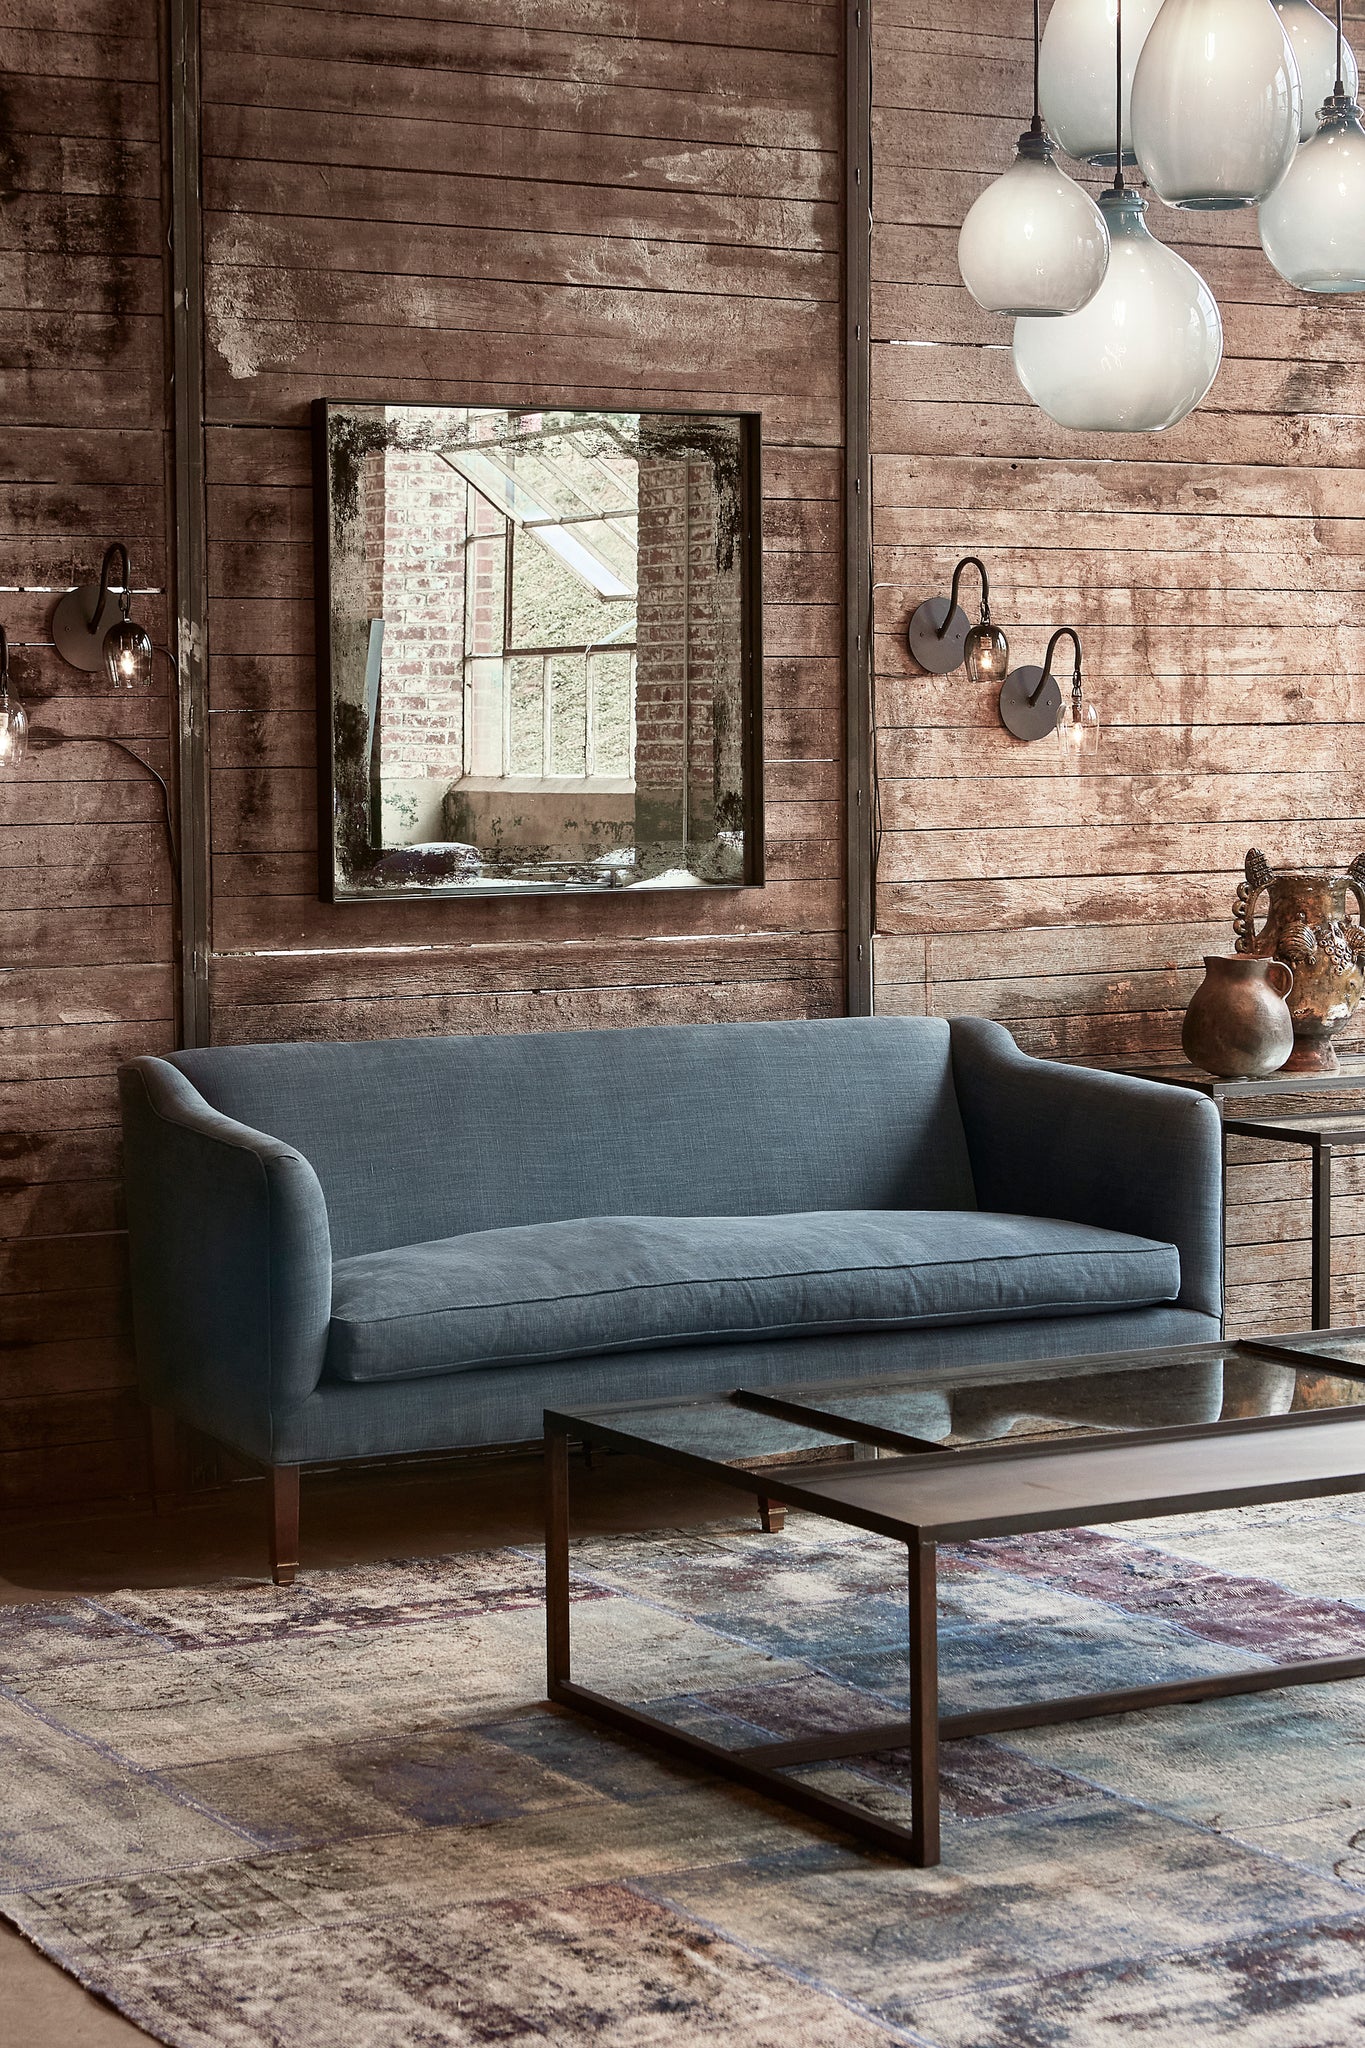  Upholstered sofa in dark grey/blue fabric with rectangular coffee table in front. Setting placed in front of wood distressed wall with square wall mirror and two pear sconces on either side. 